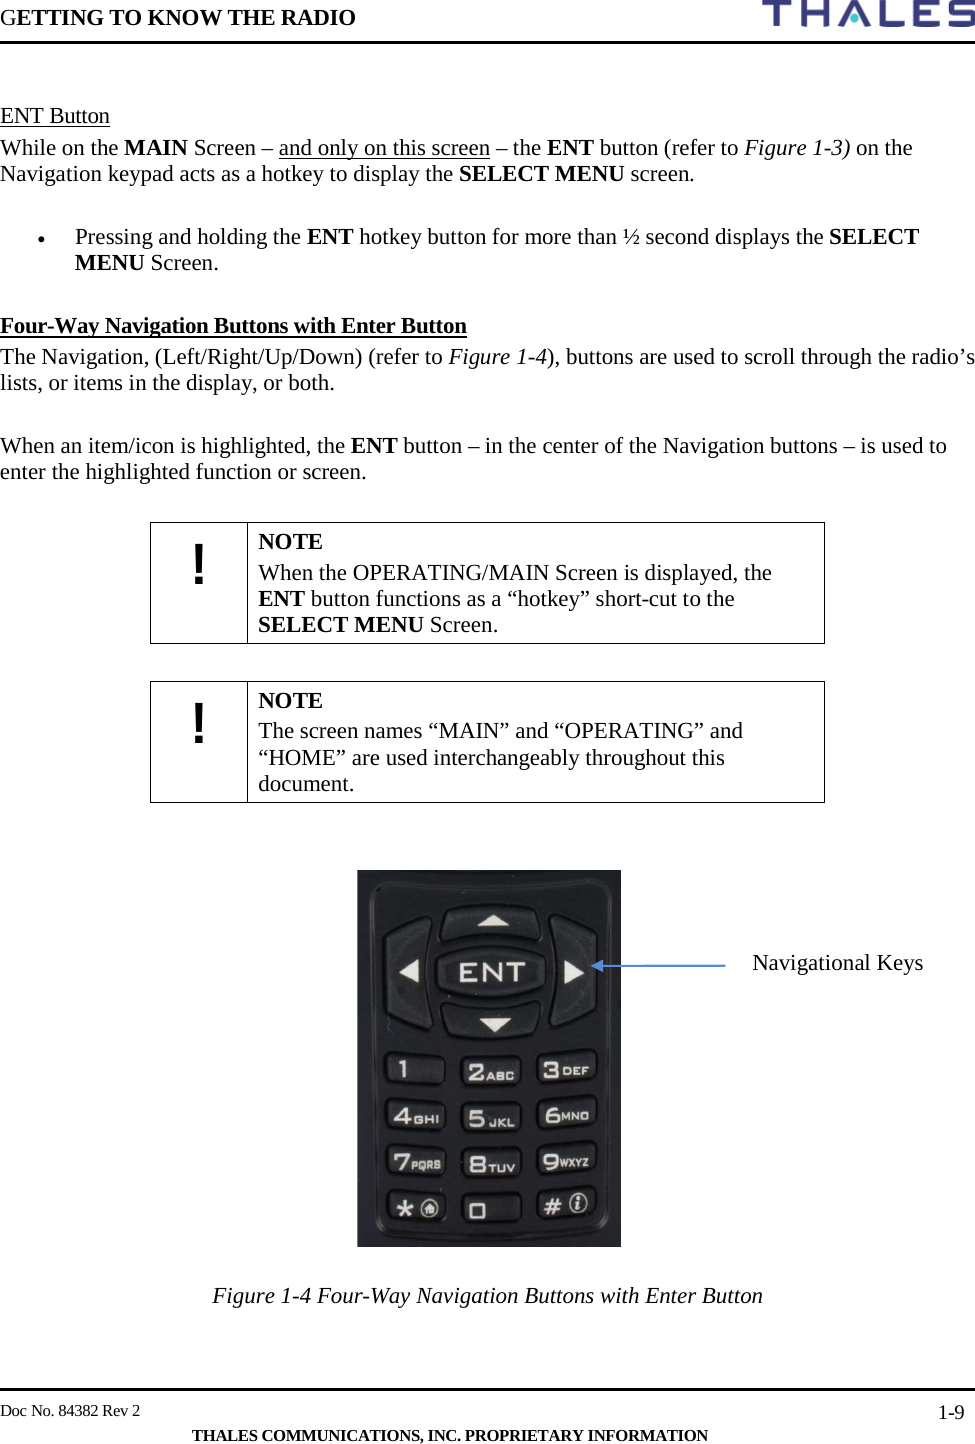 GETTING TO KNOW THE RADIO        Doc No. 84382 Rev 2     THALES COMMUNICATIONS, INC. PROPRIETARY INFORMATION 1-9  ENT Button While on the MAIN Screen – and only on this screen – the ENT button (refer to Figure 1-3) on the Navigation keypad acts as a hotkey to display the SELECT MENU screen.   • Pressing and holding the ENT hotkey button for more than ½ second displays the SELECT MENU Screen.    Four-Way Navigation Buttons with Enter Button The Navigation, (Left/Right/Up/Down) (refer to Figure 1-4), buttons are used to scroll through the radio’s lists, or items in the display, or both.  When an item/icon is highlighted, the ENT button – in the center of the Navigation buttons – is used to enter the highlighted function or screen.  ! NOTE When the OPERATING/MAIN Screen is displayed, the ENT button functions as a “hotkey” short-cut to the SELECT MENU Screen.  ! NOTE The screen names “MAIN” and “OPERATING” and “HOME” are used interchangeably throughout this document.     Figure 1-4 Four-Way Navigation Buttons with Enter Button Navigational Keys 